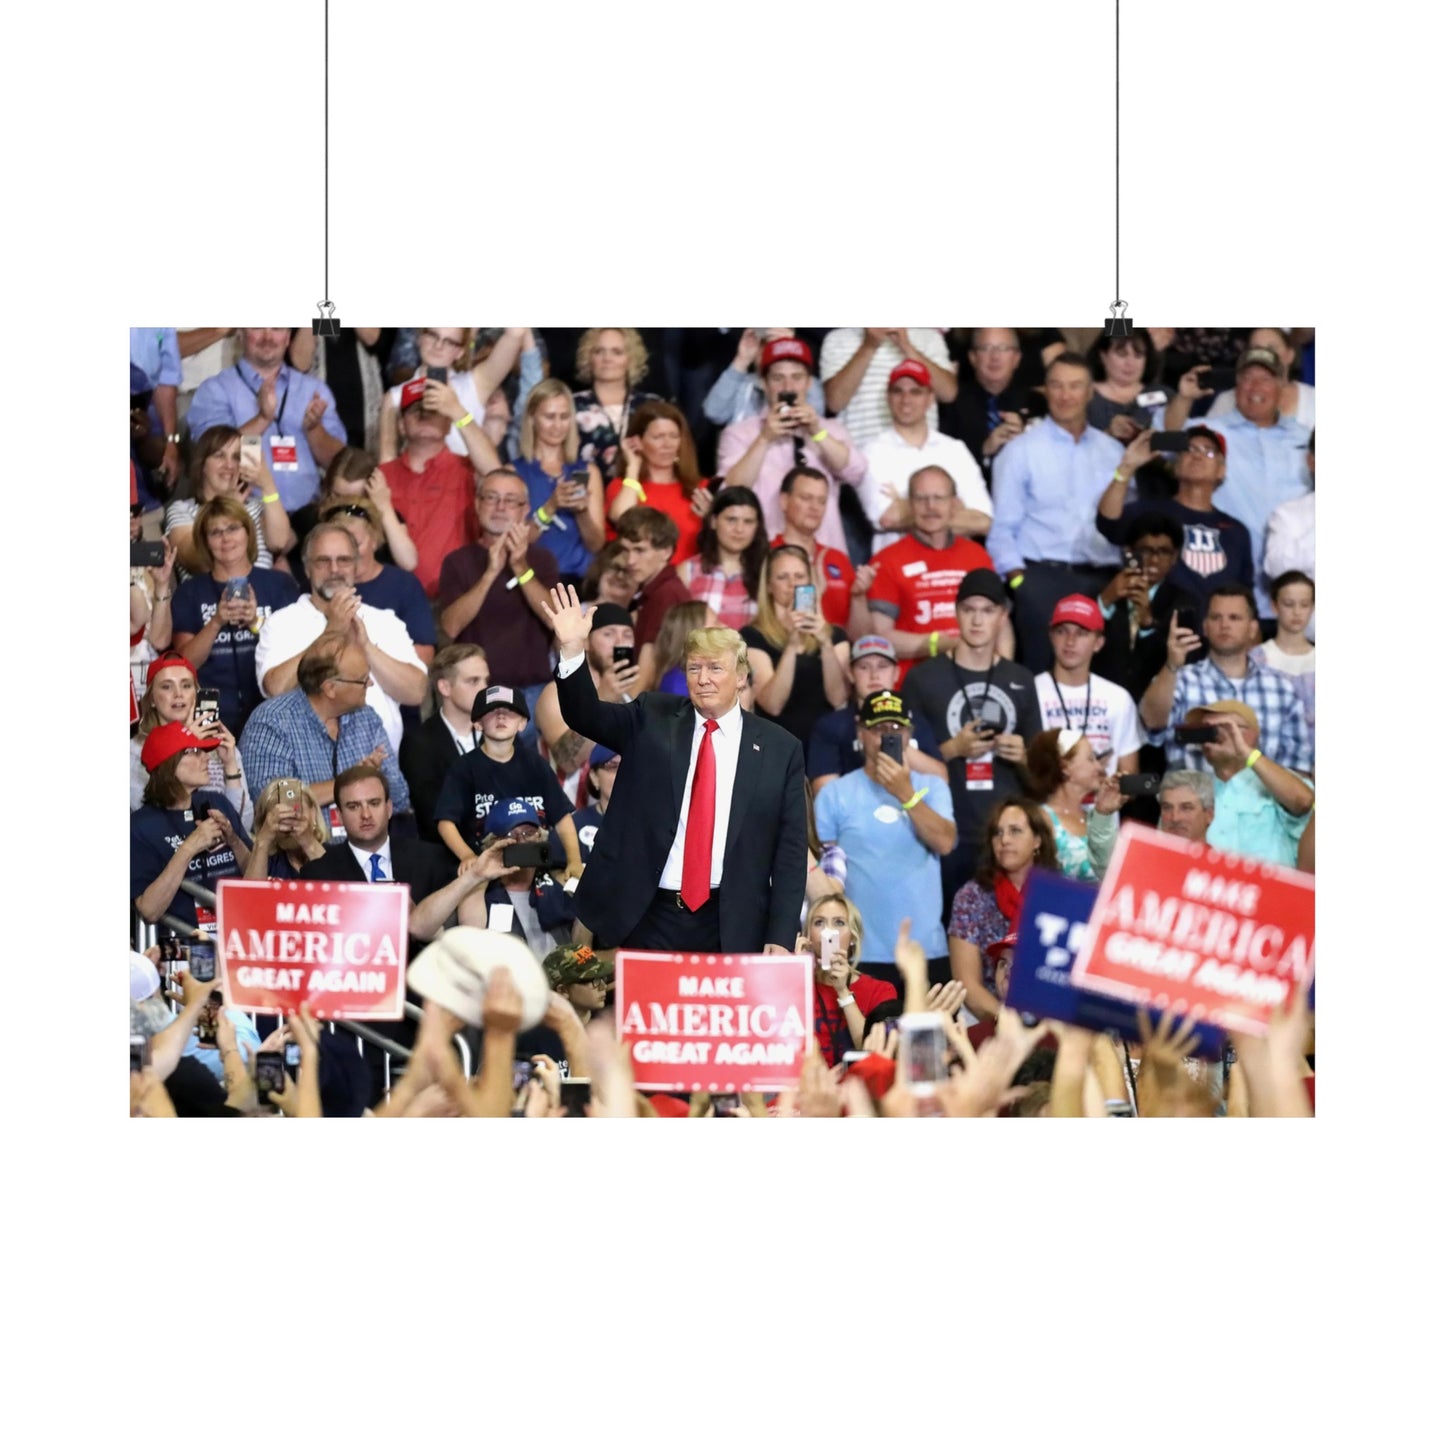 Donald Trump At A Make America Great Again Rally Poster